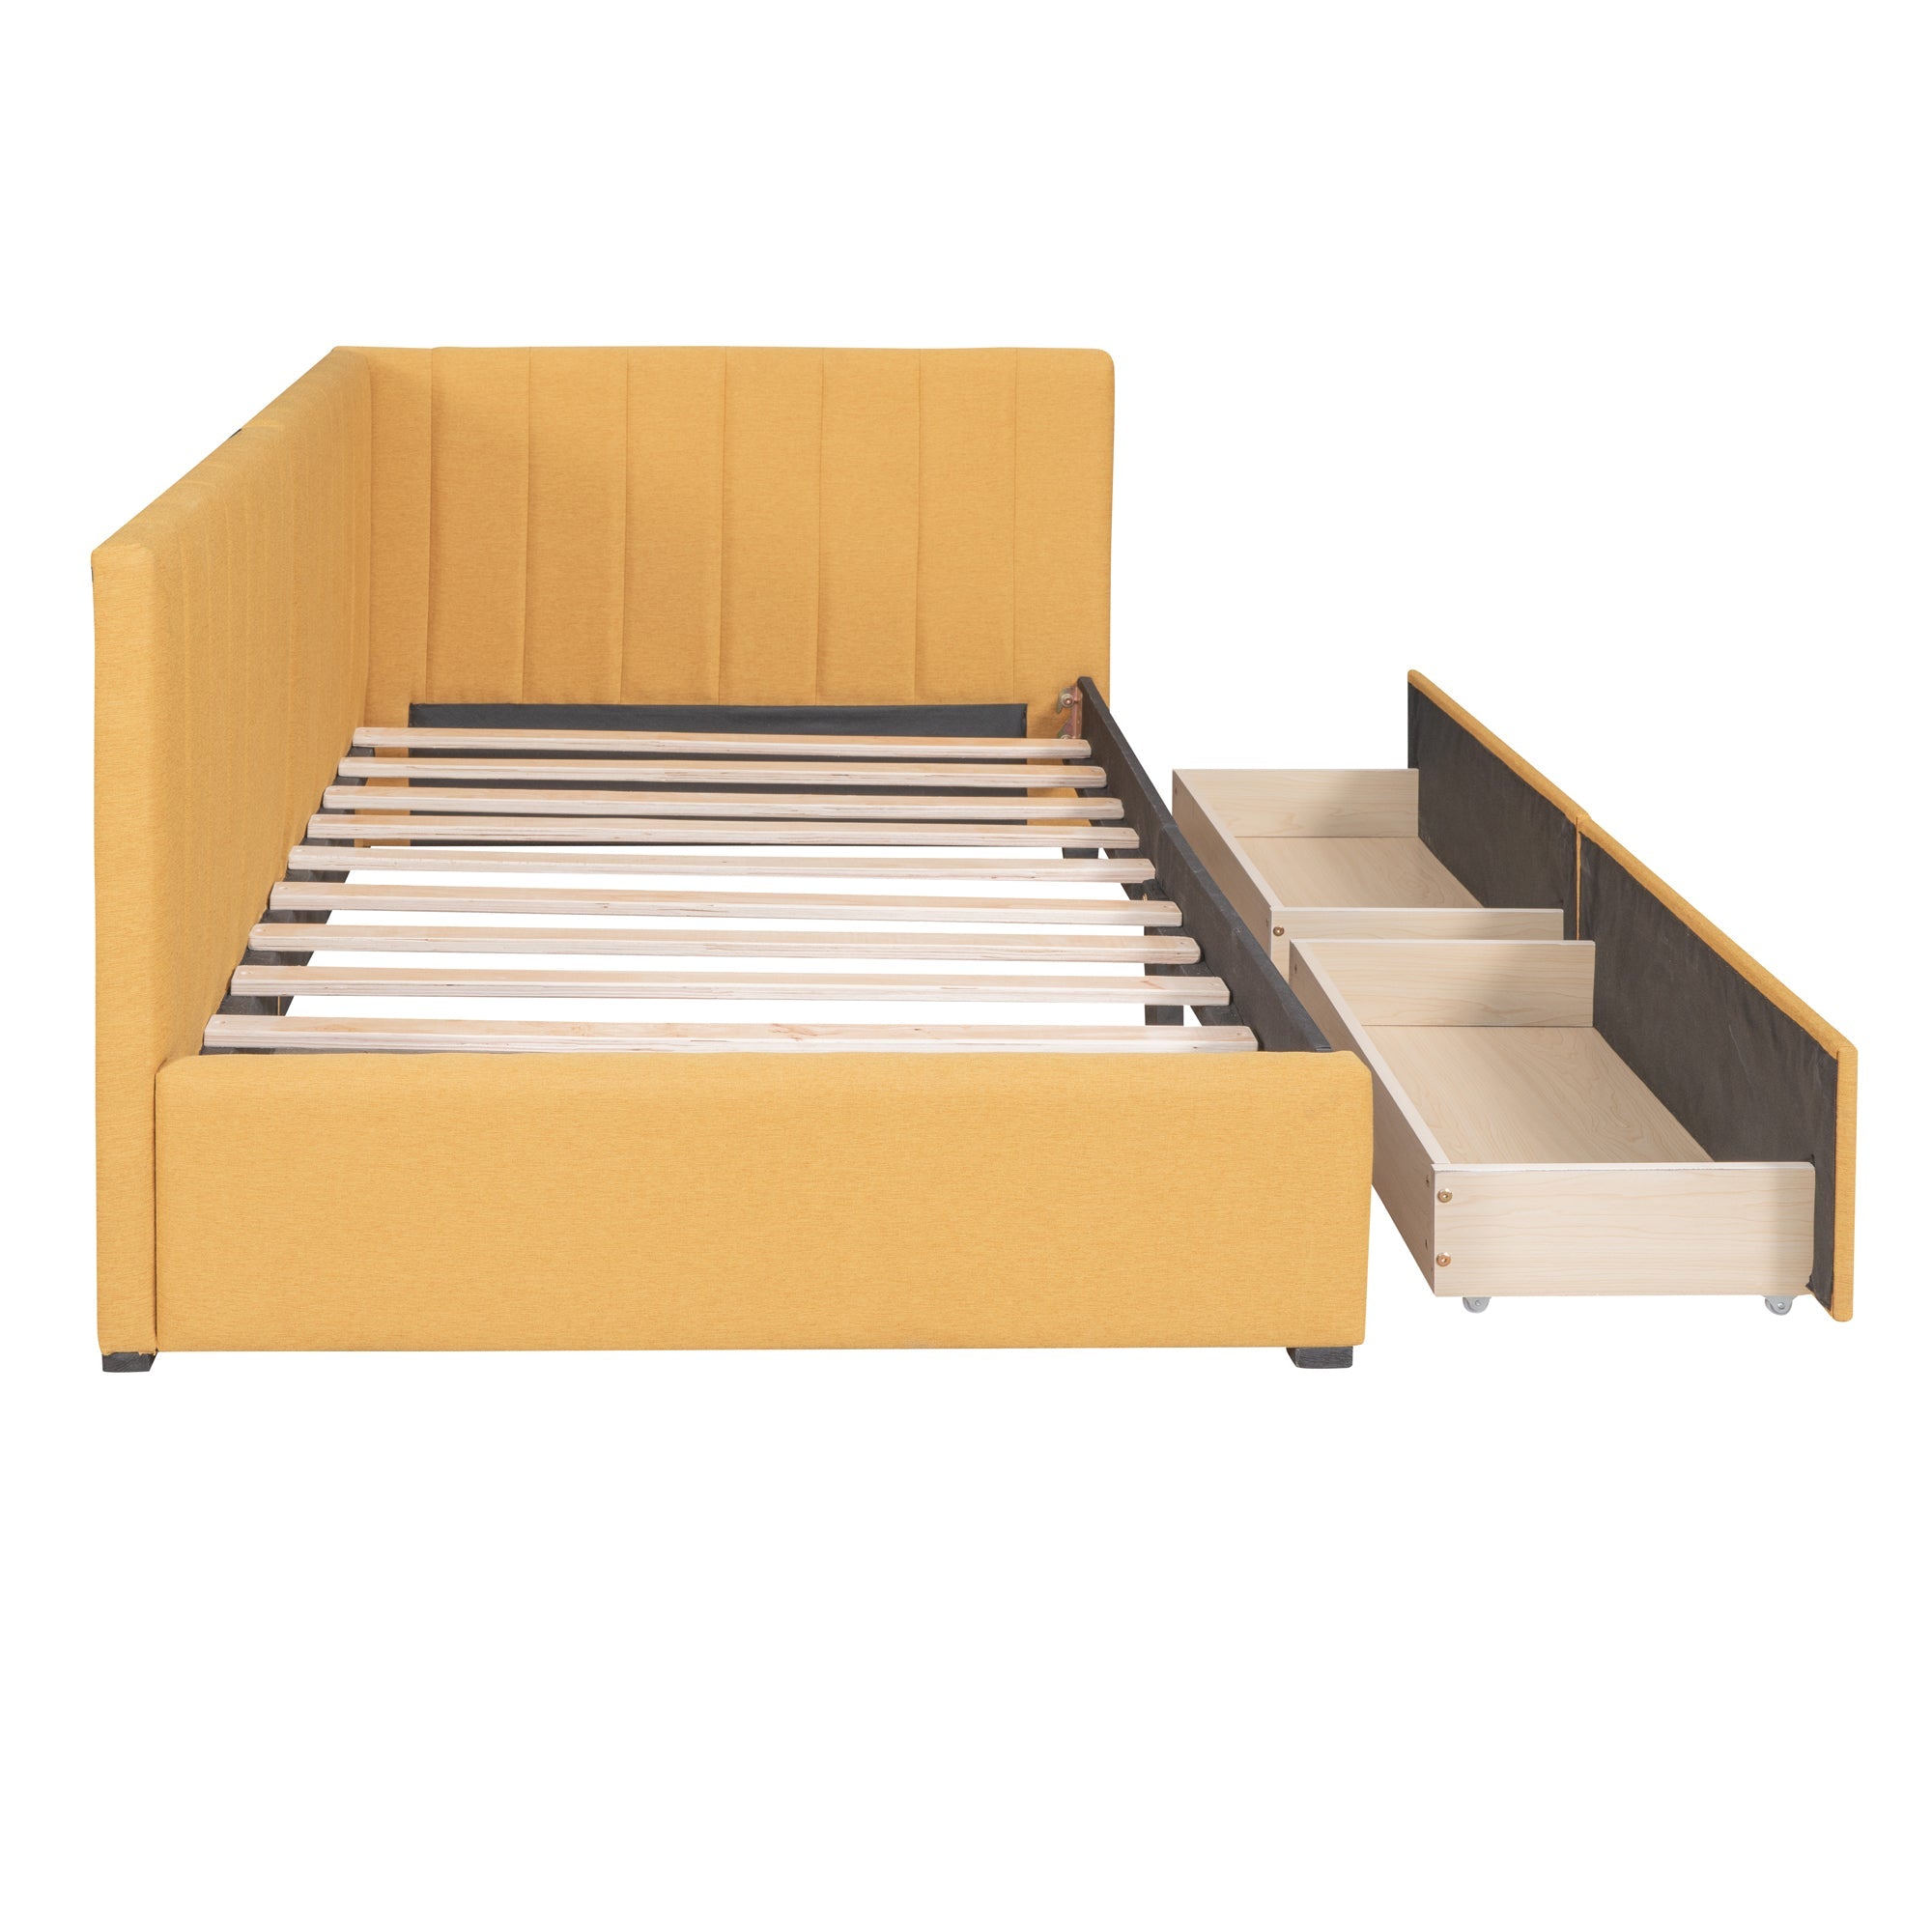 Bellemave Twin Size Upholstered Daybed with 2 Drawers - Bellemave